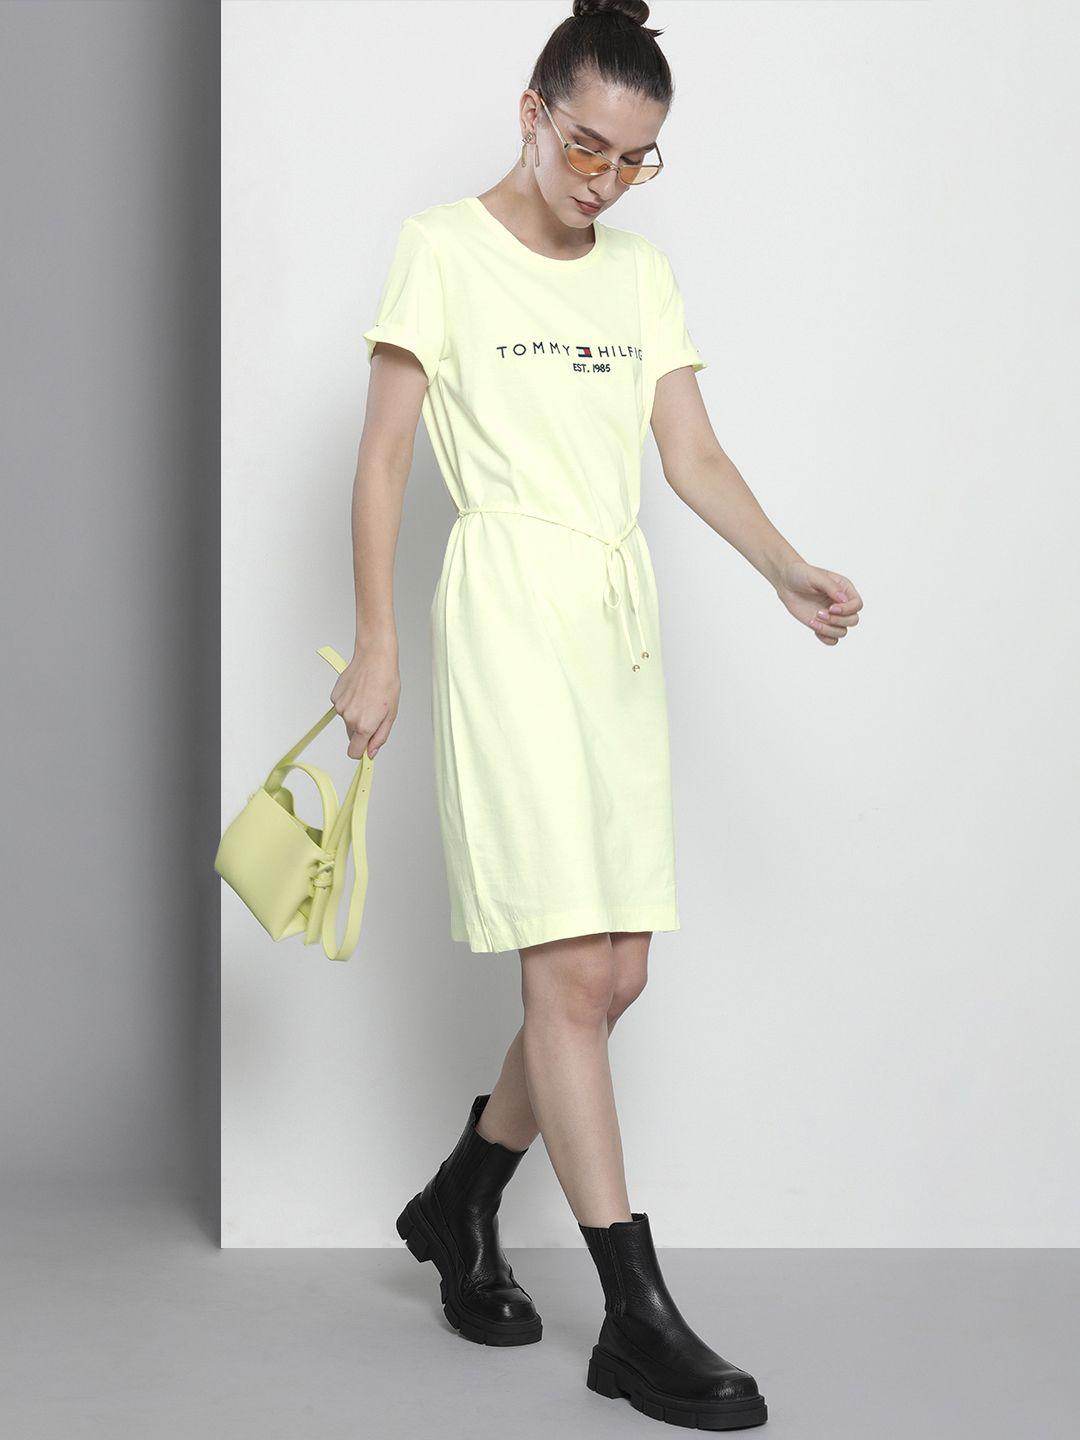 tommy hilfiger fluorescent green typography printed t-shirt dress